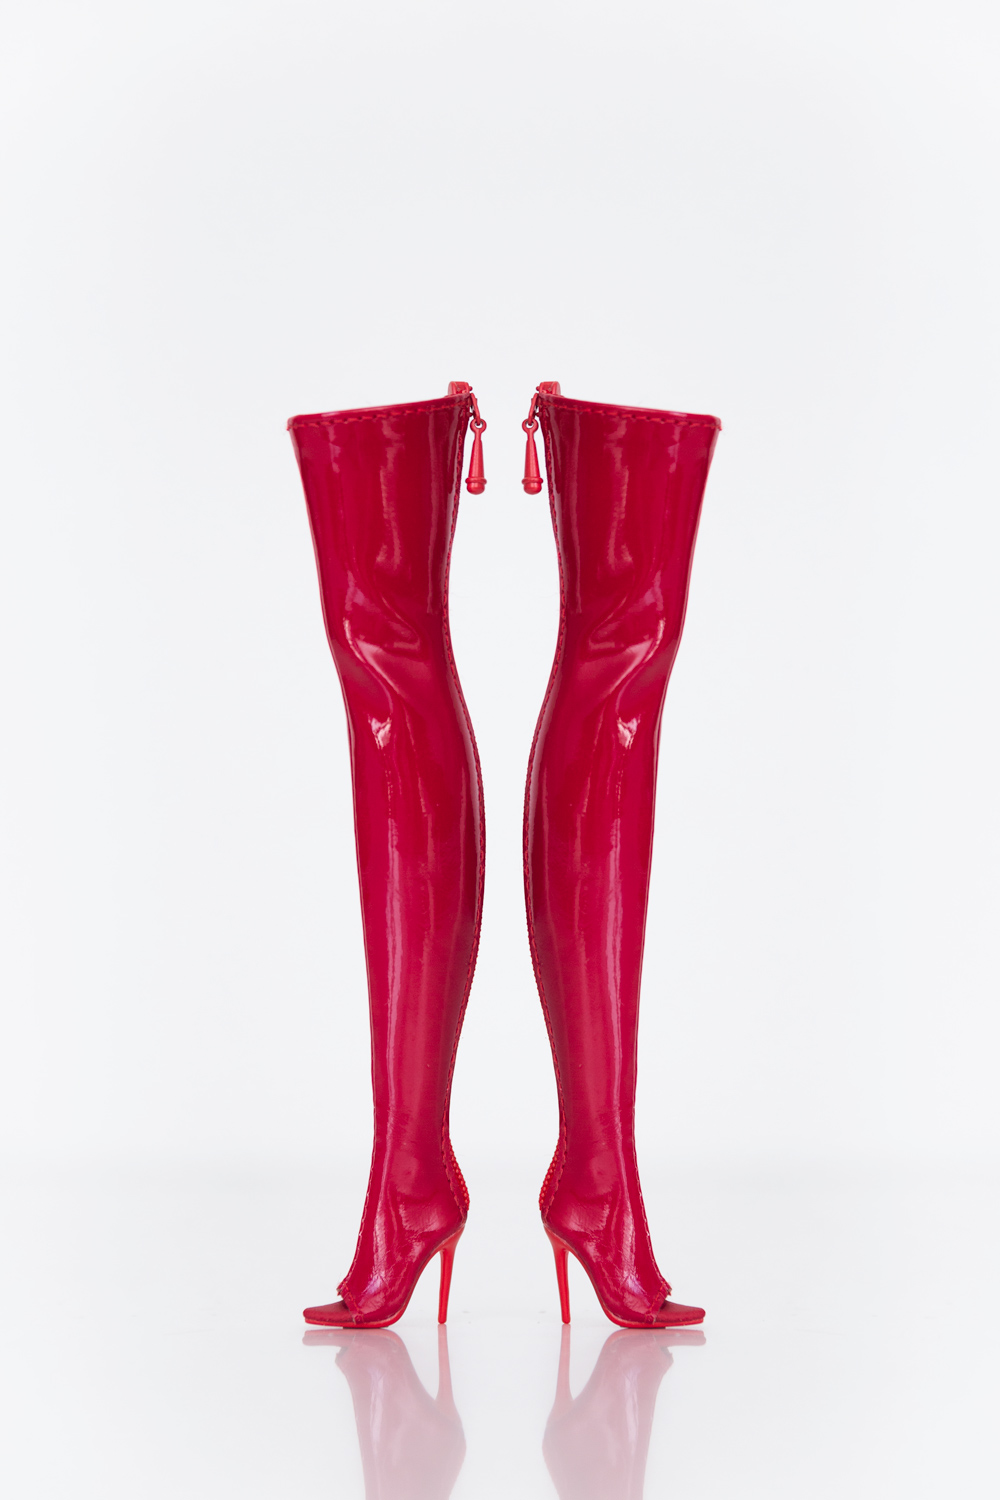 {Carly}
Peep-toe thigh high boots
In red patent faux leather.